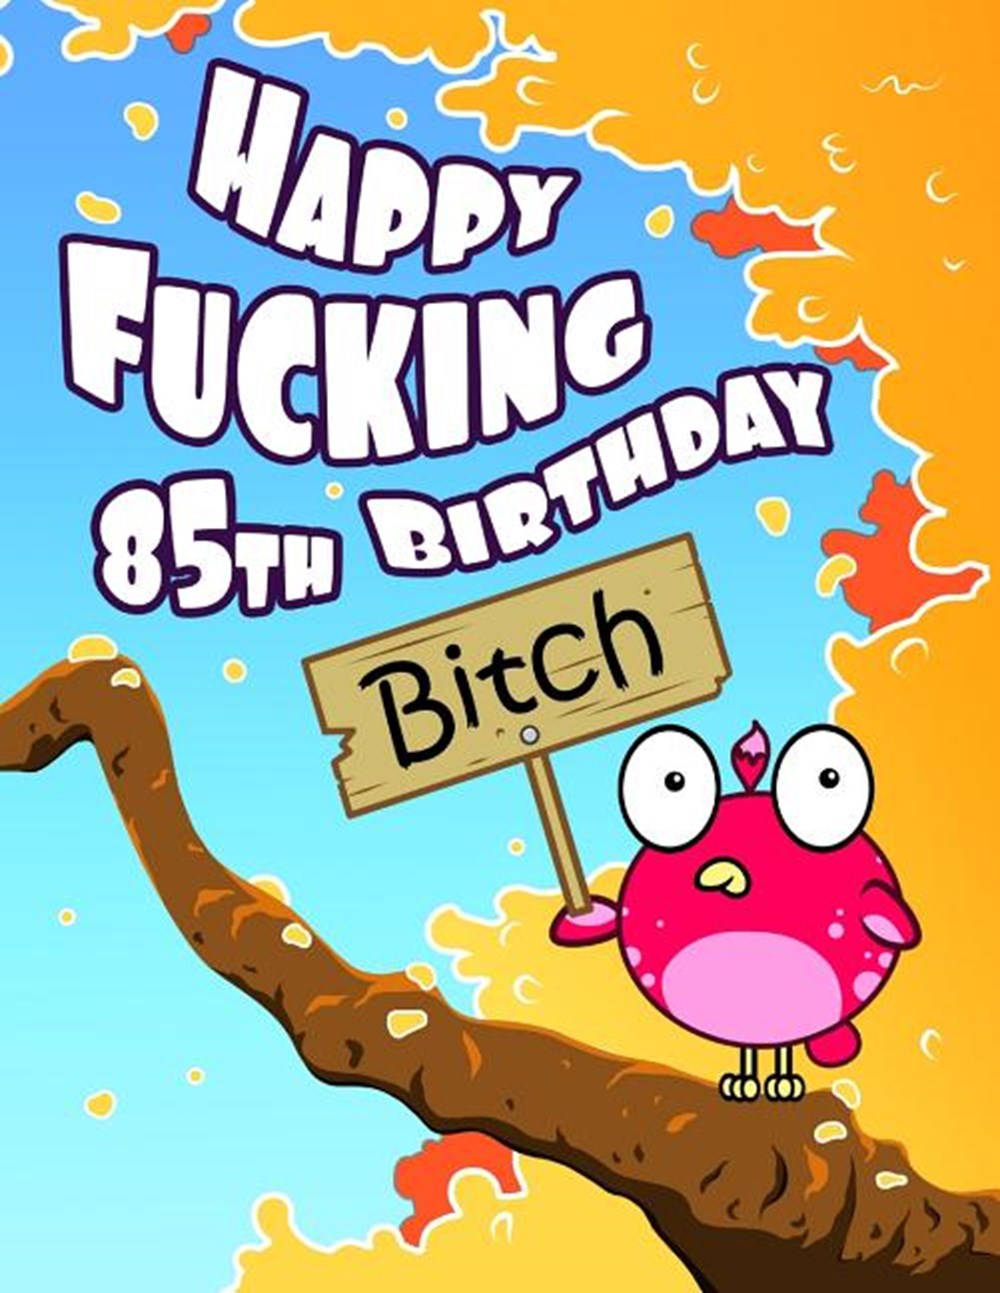 Happy Fucking 85th Birthday Bitch: Sweet Sprinkled with Sassy...Forget the Funny Birthday Card and G